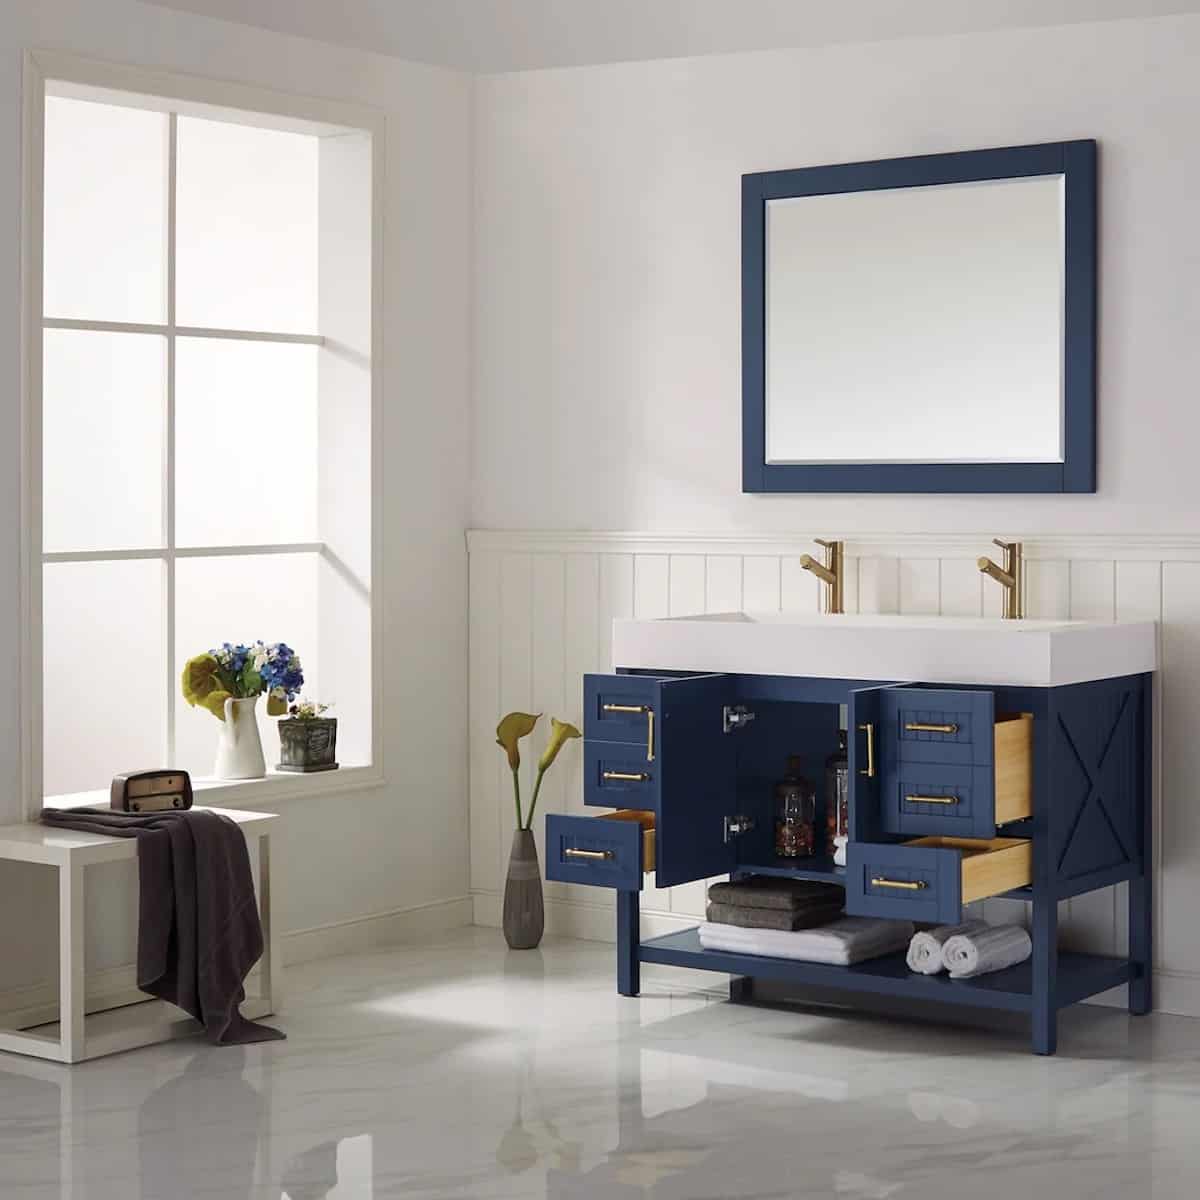 Vinnova Pavia 48 Inch Royal Blue Freestanding Double Vanity with Acrylic Under-Mount Sink With Mirror Inside 755048-RB-WH